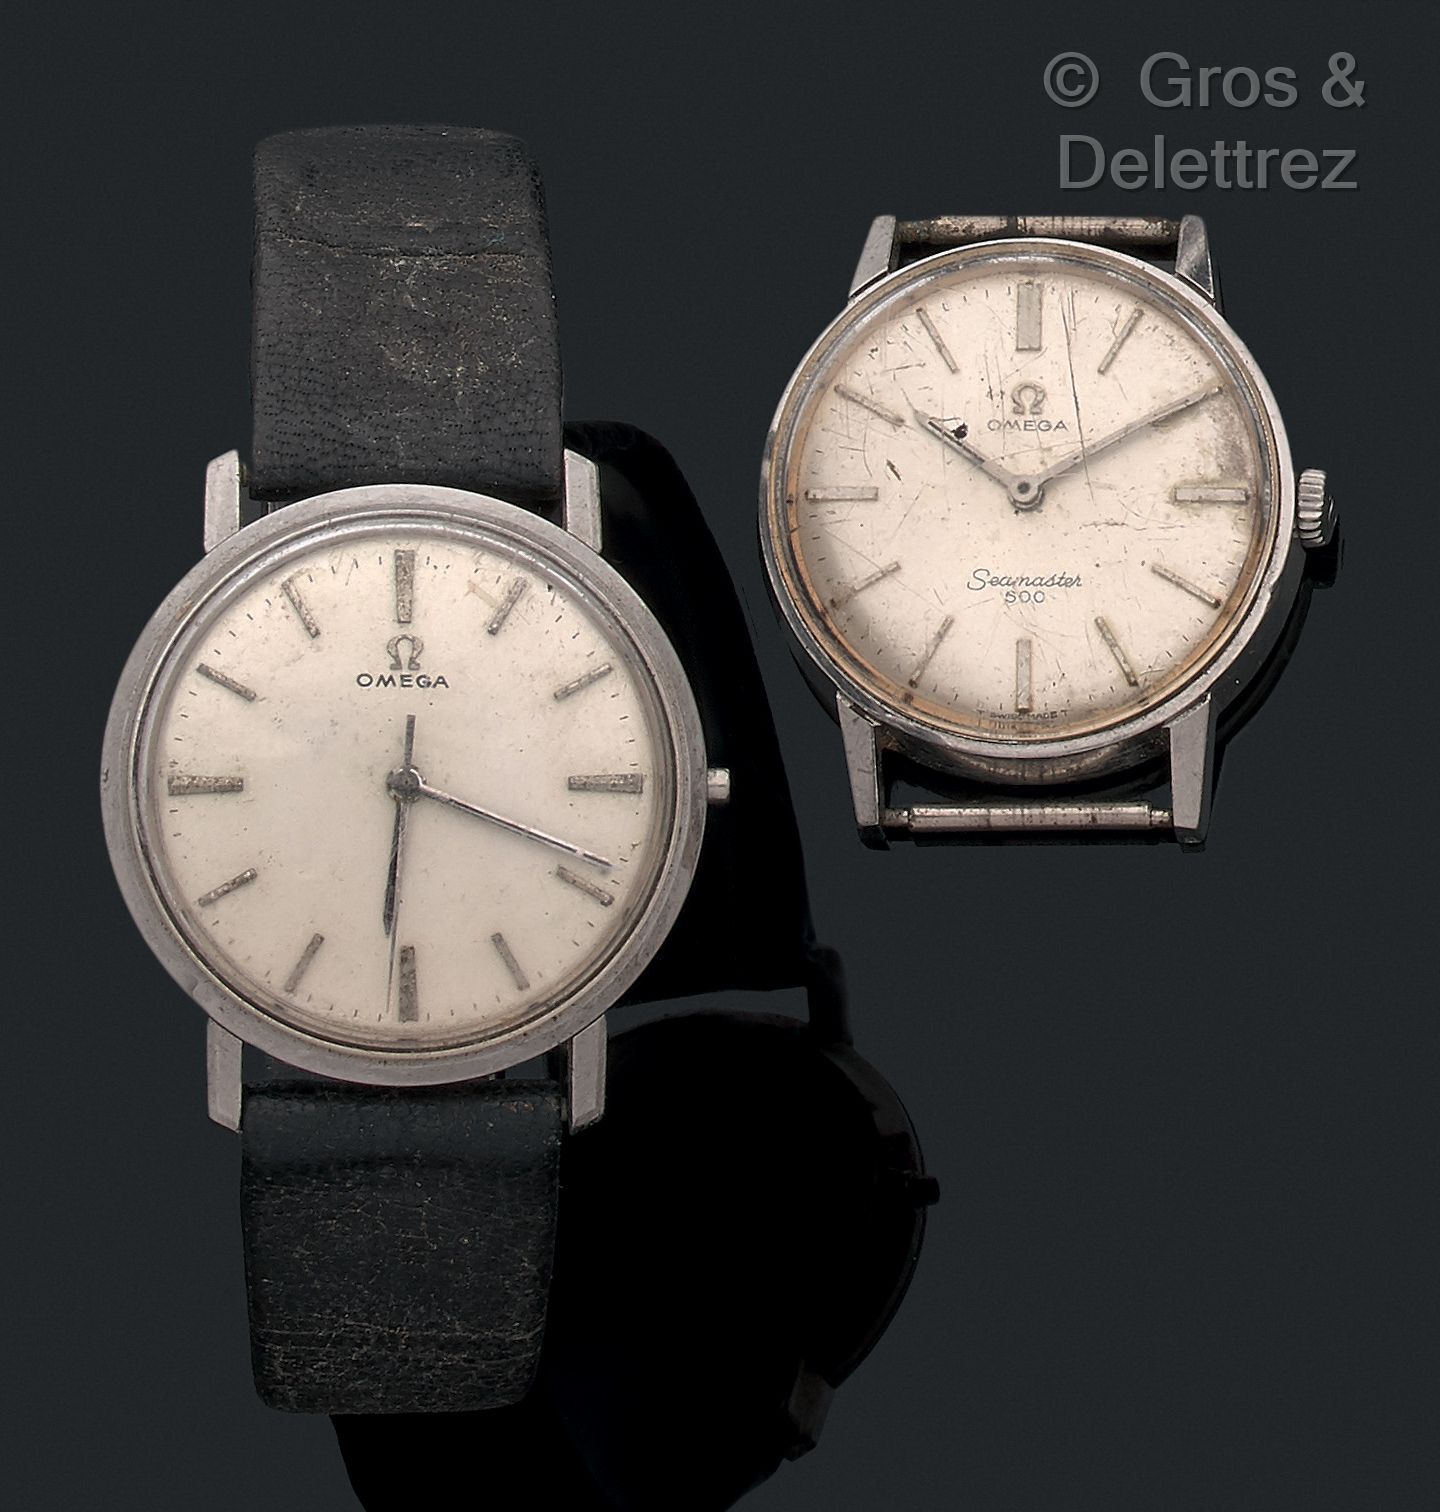 OMEGA Lot of 2 watches from the 60s in steel. One is missing the winder.